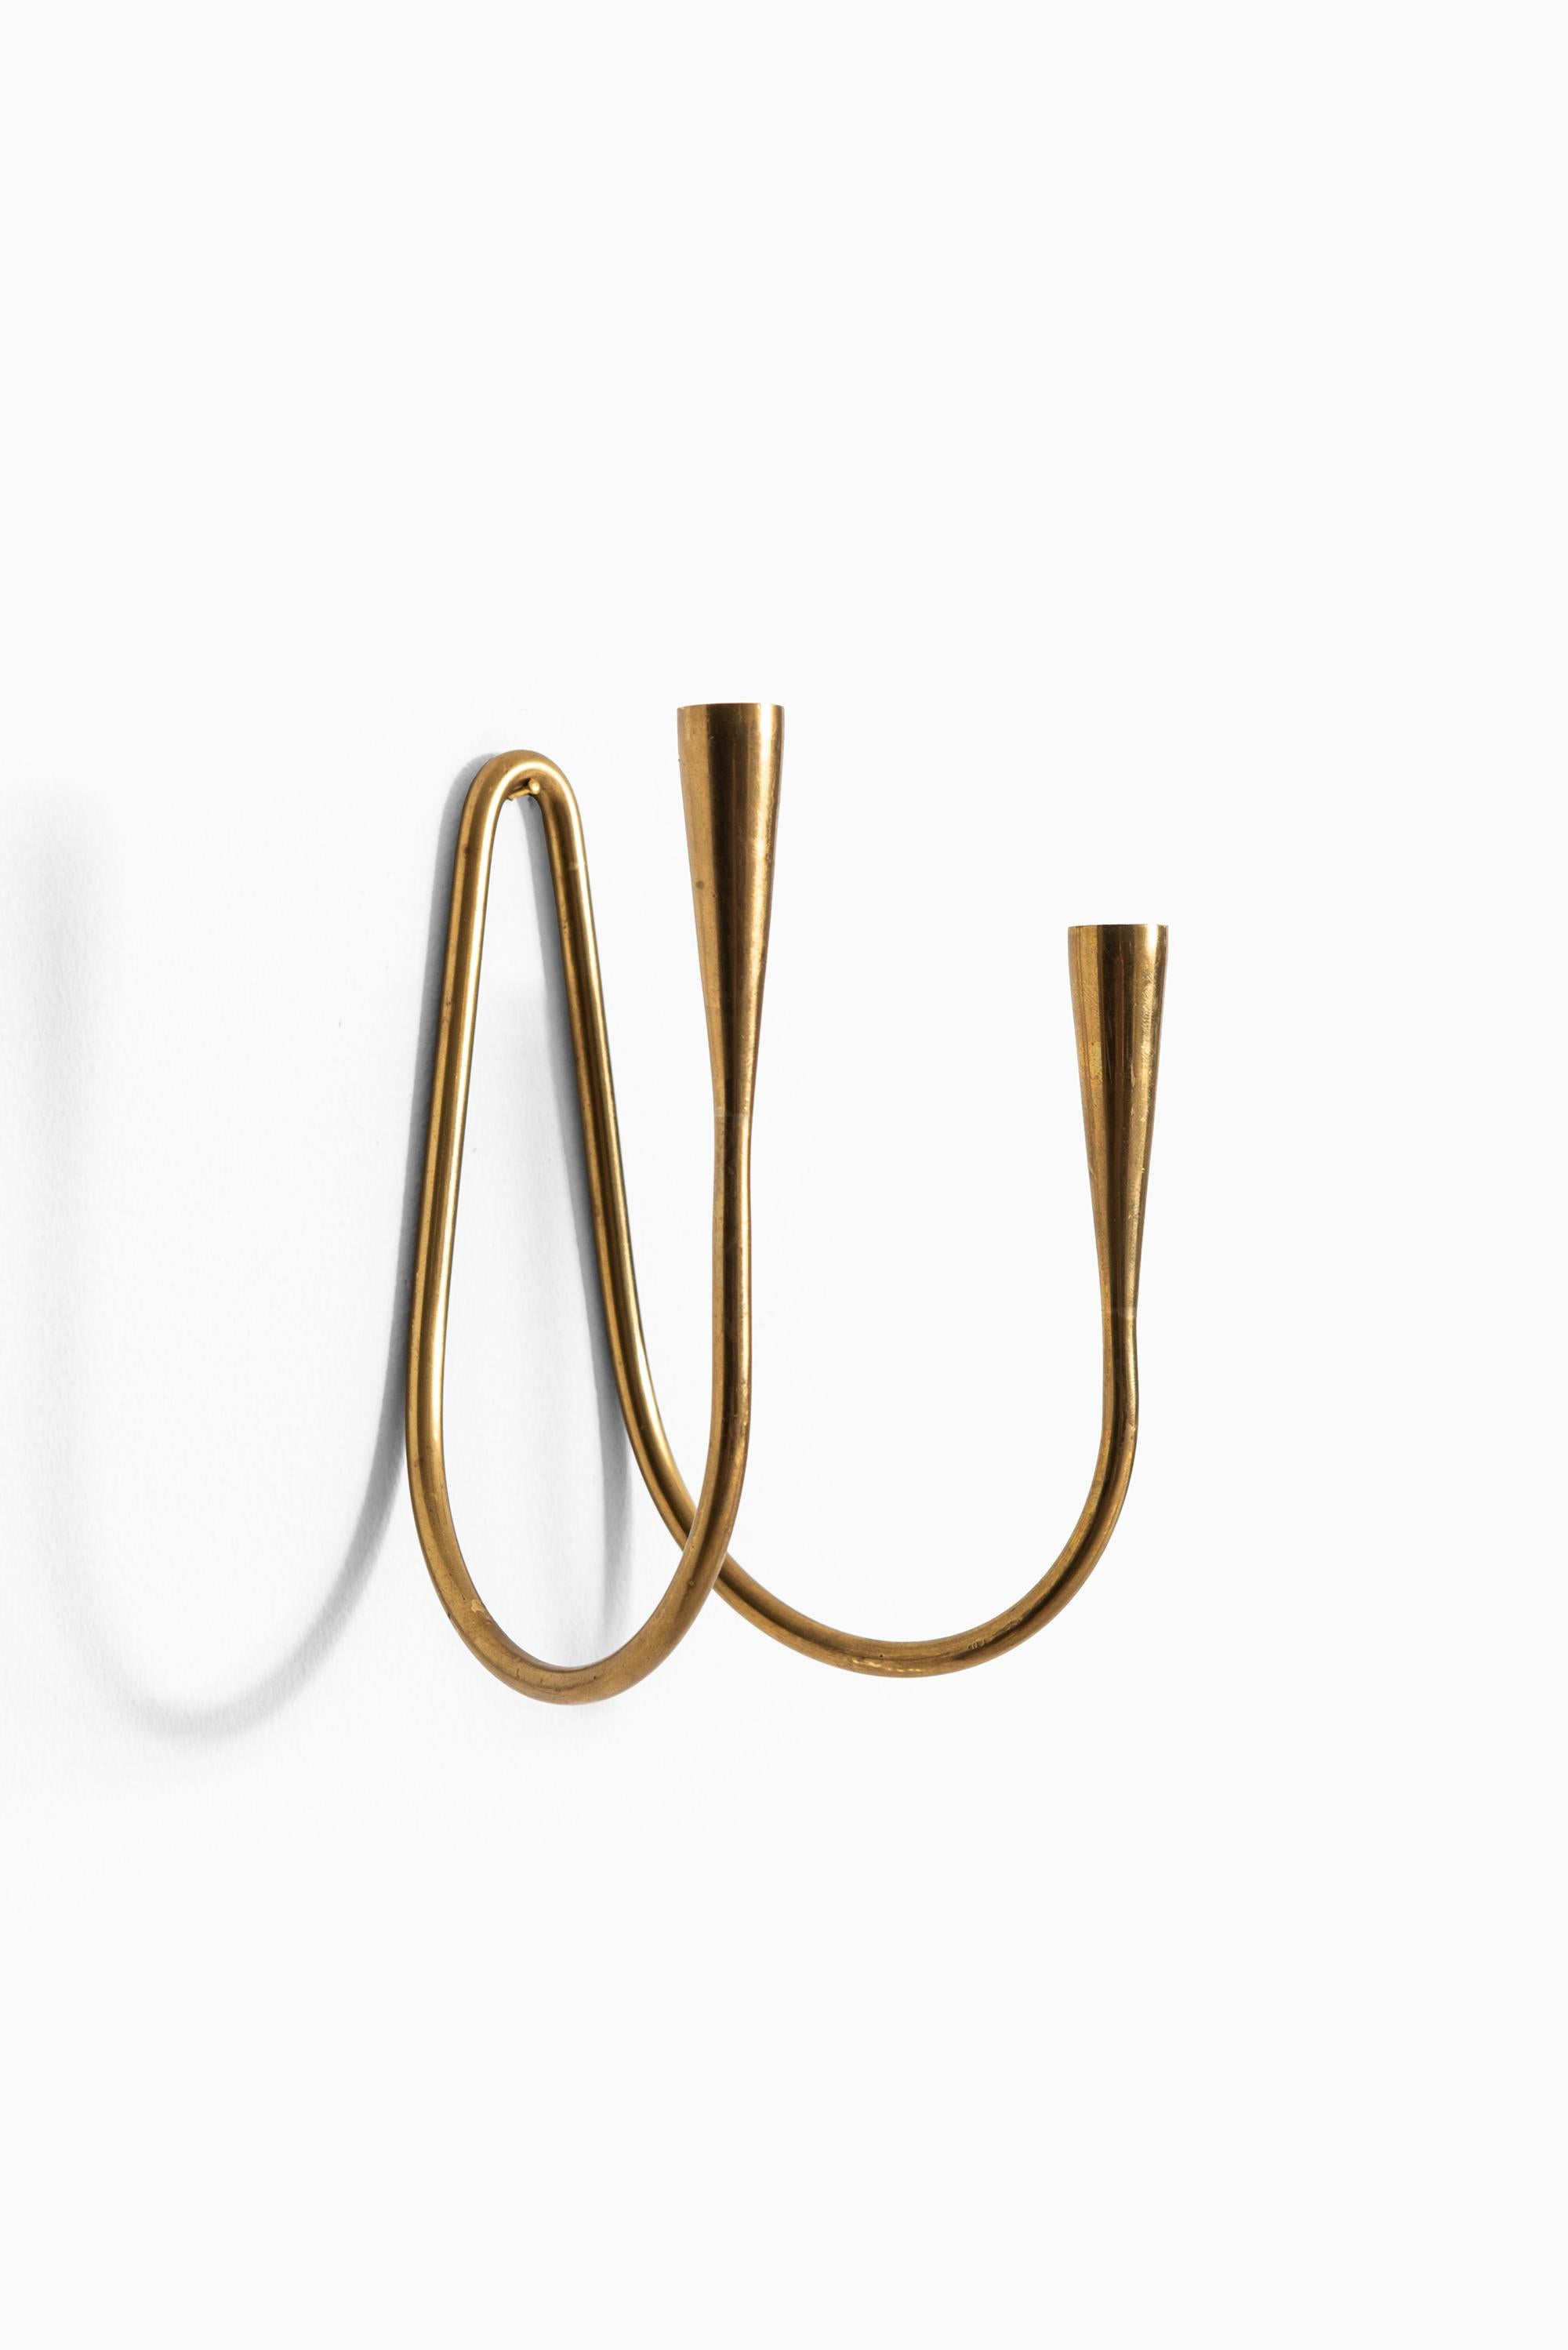 Wall hanged candlesticks in brass. Produced by Illum Bolighus in Denmark. Pair available.